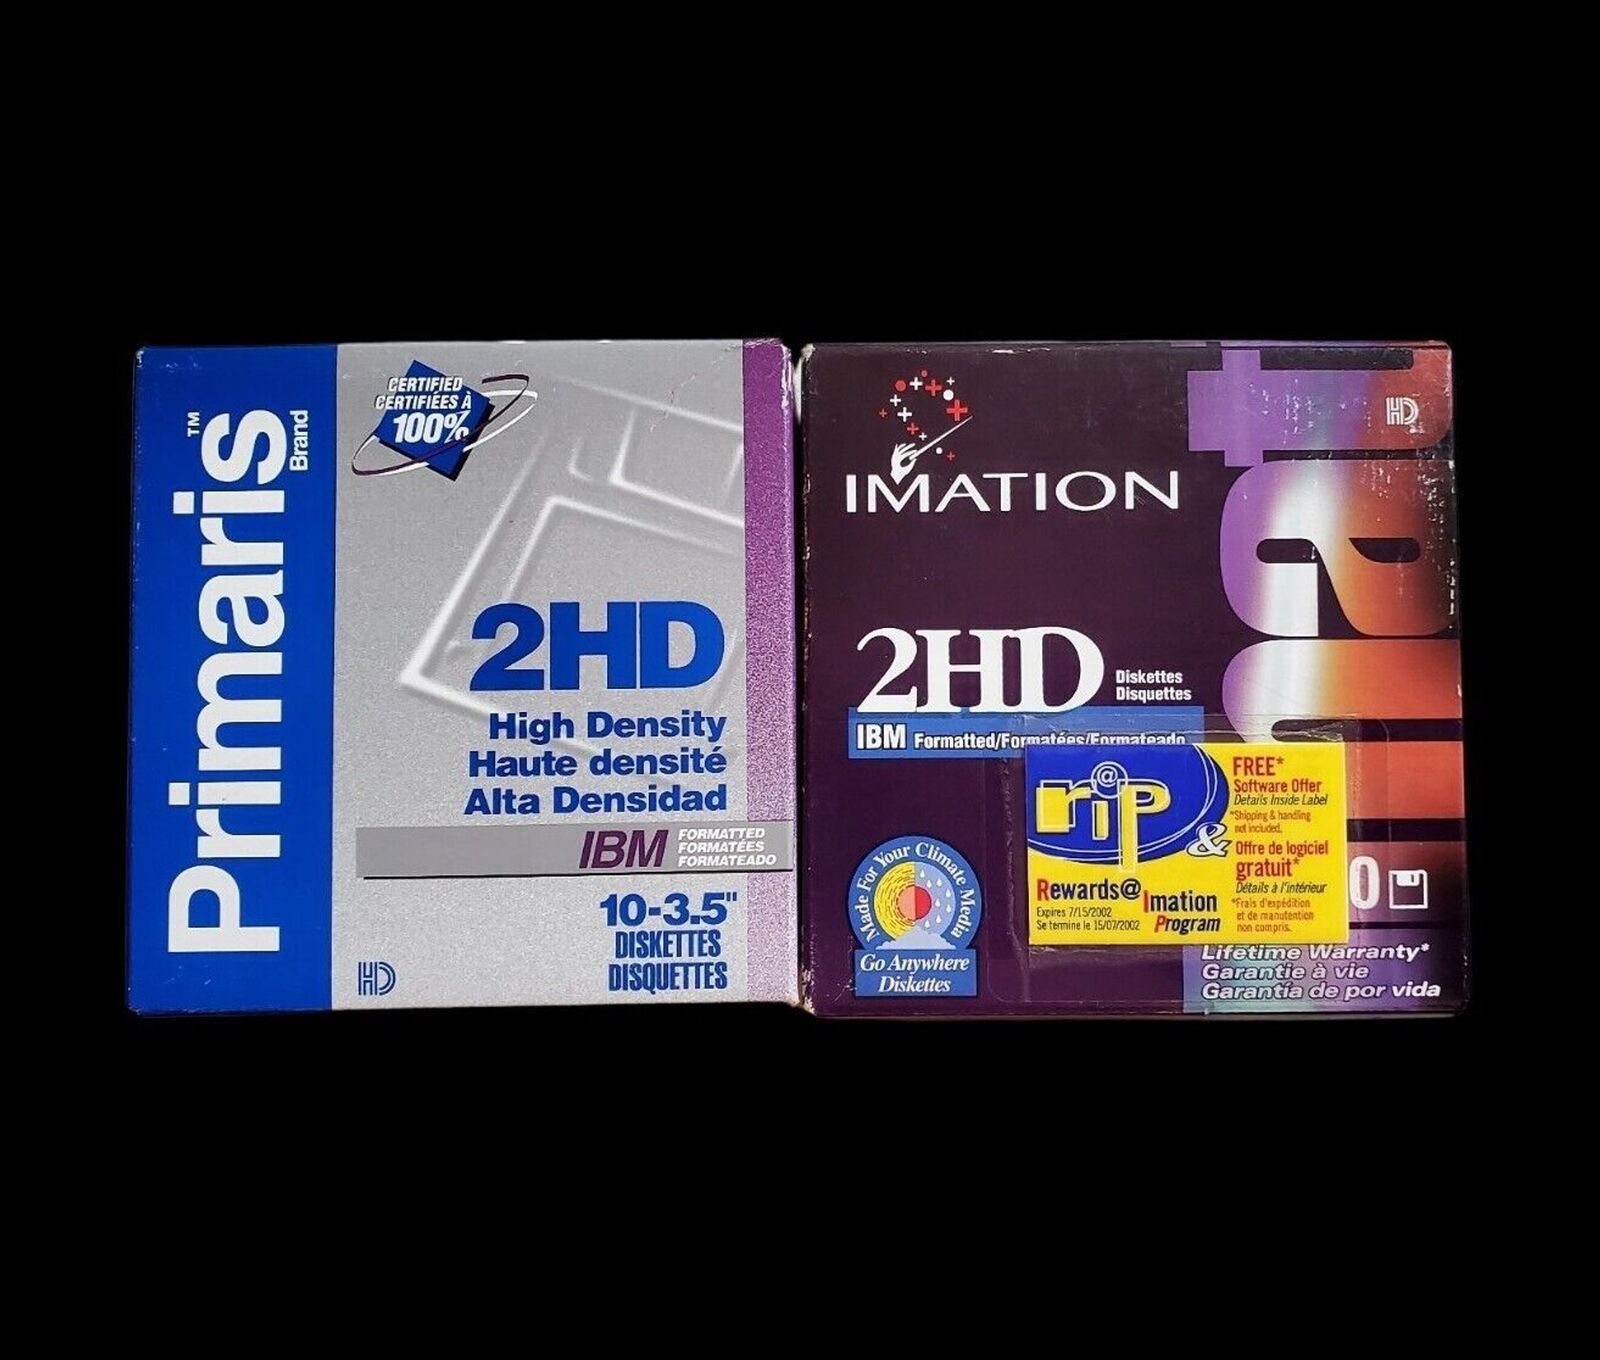 Lot Of Two Packs Of 10 Imation & Primaris 2HD 1.44mb 3.5 Floppy Disks Discs